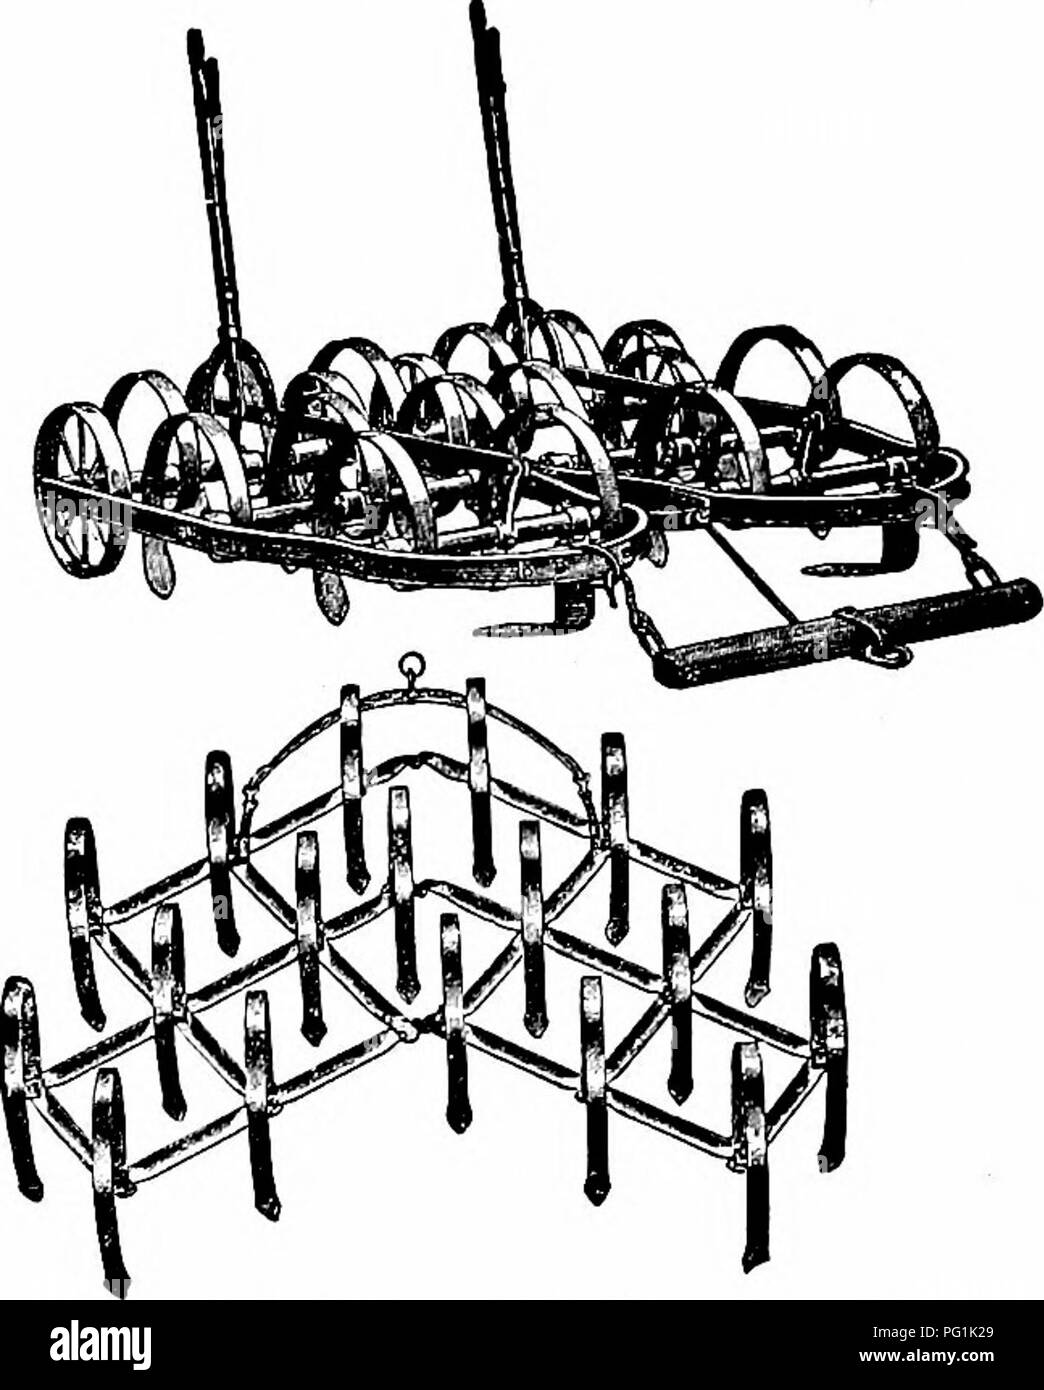 . Manual of gardening; a practical guide to the making of home grounds and the growing of flowers, fruits, and vegetables for home use. Gardening. THE HANDLING OF THE LAND 95 land is accomplished by light implements of the pattern shown in Fig. 88. These spike-tooth smoothing-harrows do for the field what the hand-rake does for the garden-bed. If it is desired to put a very fine finish on the surface of the ground by means of horse tools, im- plements like the Breed or Wiard weeder may be used. These are con- structed on the principle of a spring-tooth horse hay-rake, and are most excellent, n Stock Photo